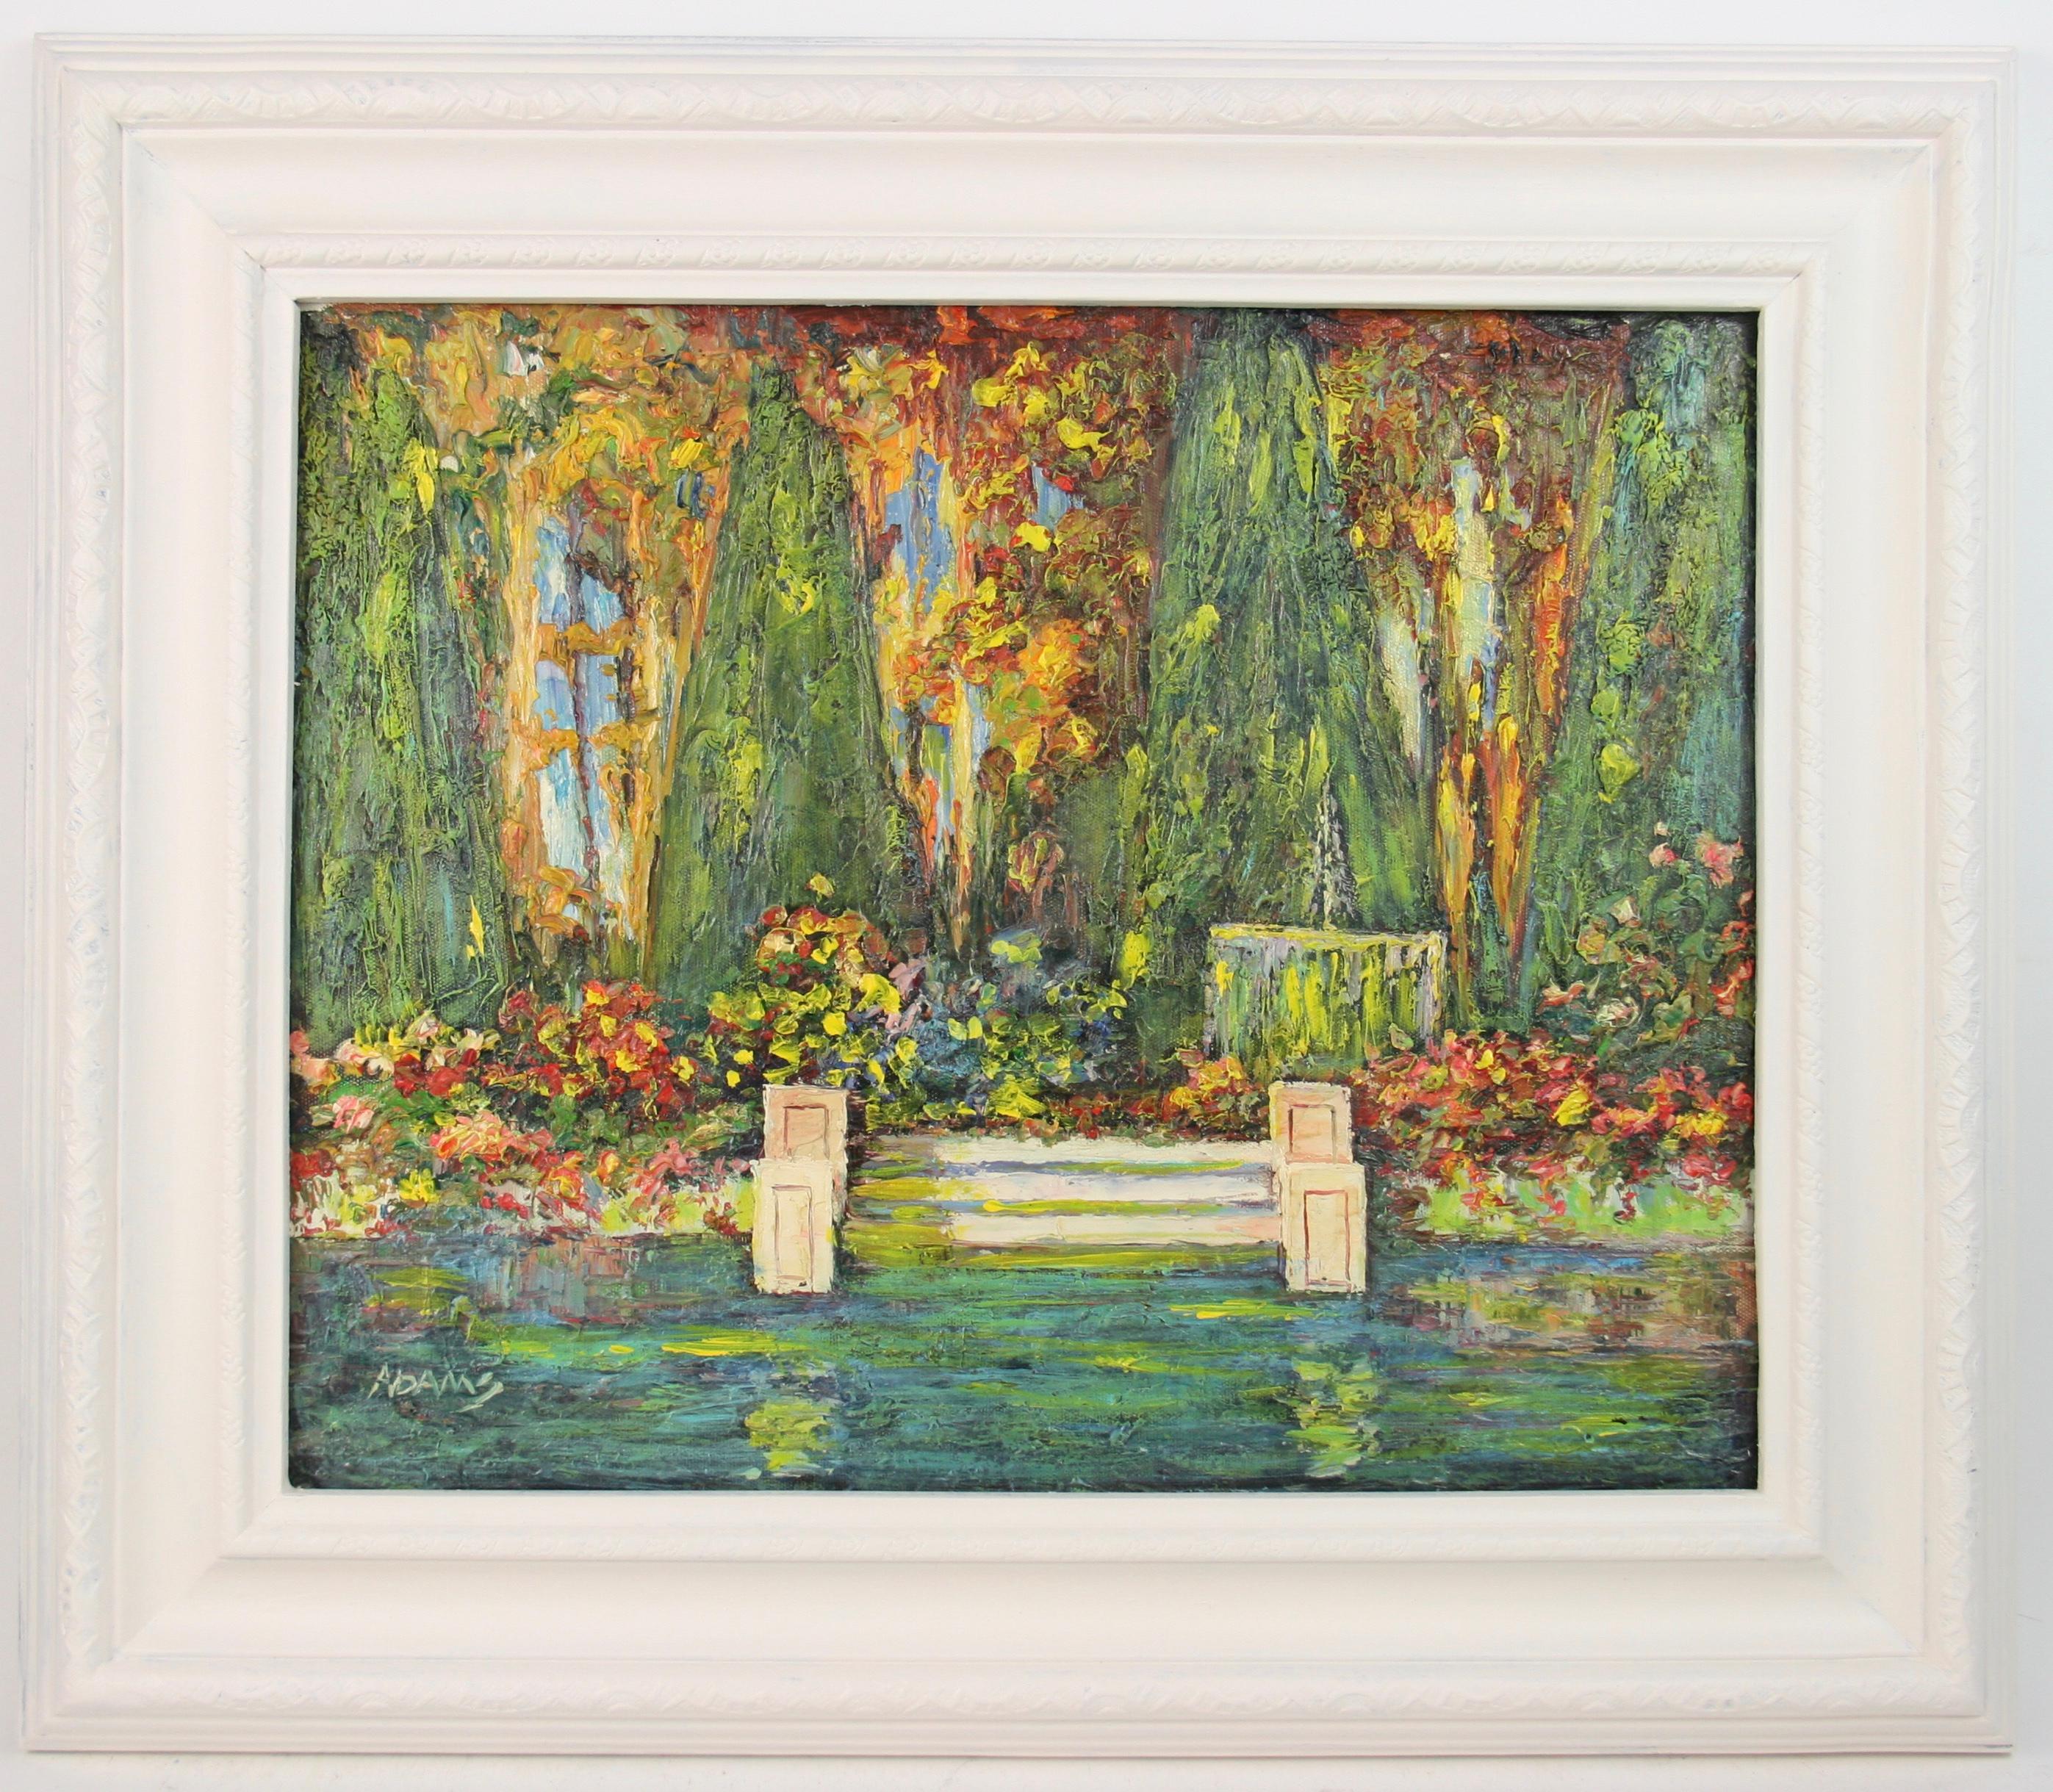 5-3365 Oil on artist board of on enchanted lily pond
Set in an ornate hand painted wood frame
Image size 12.5x15.5